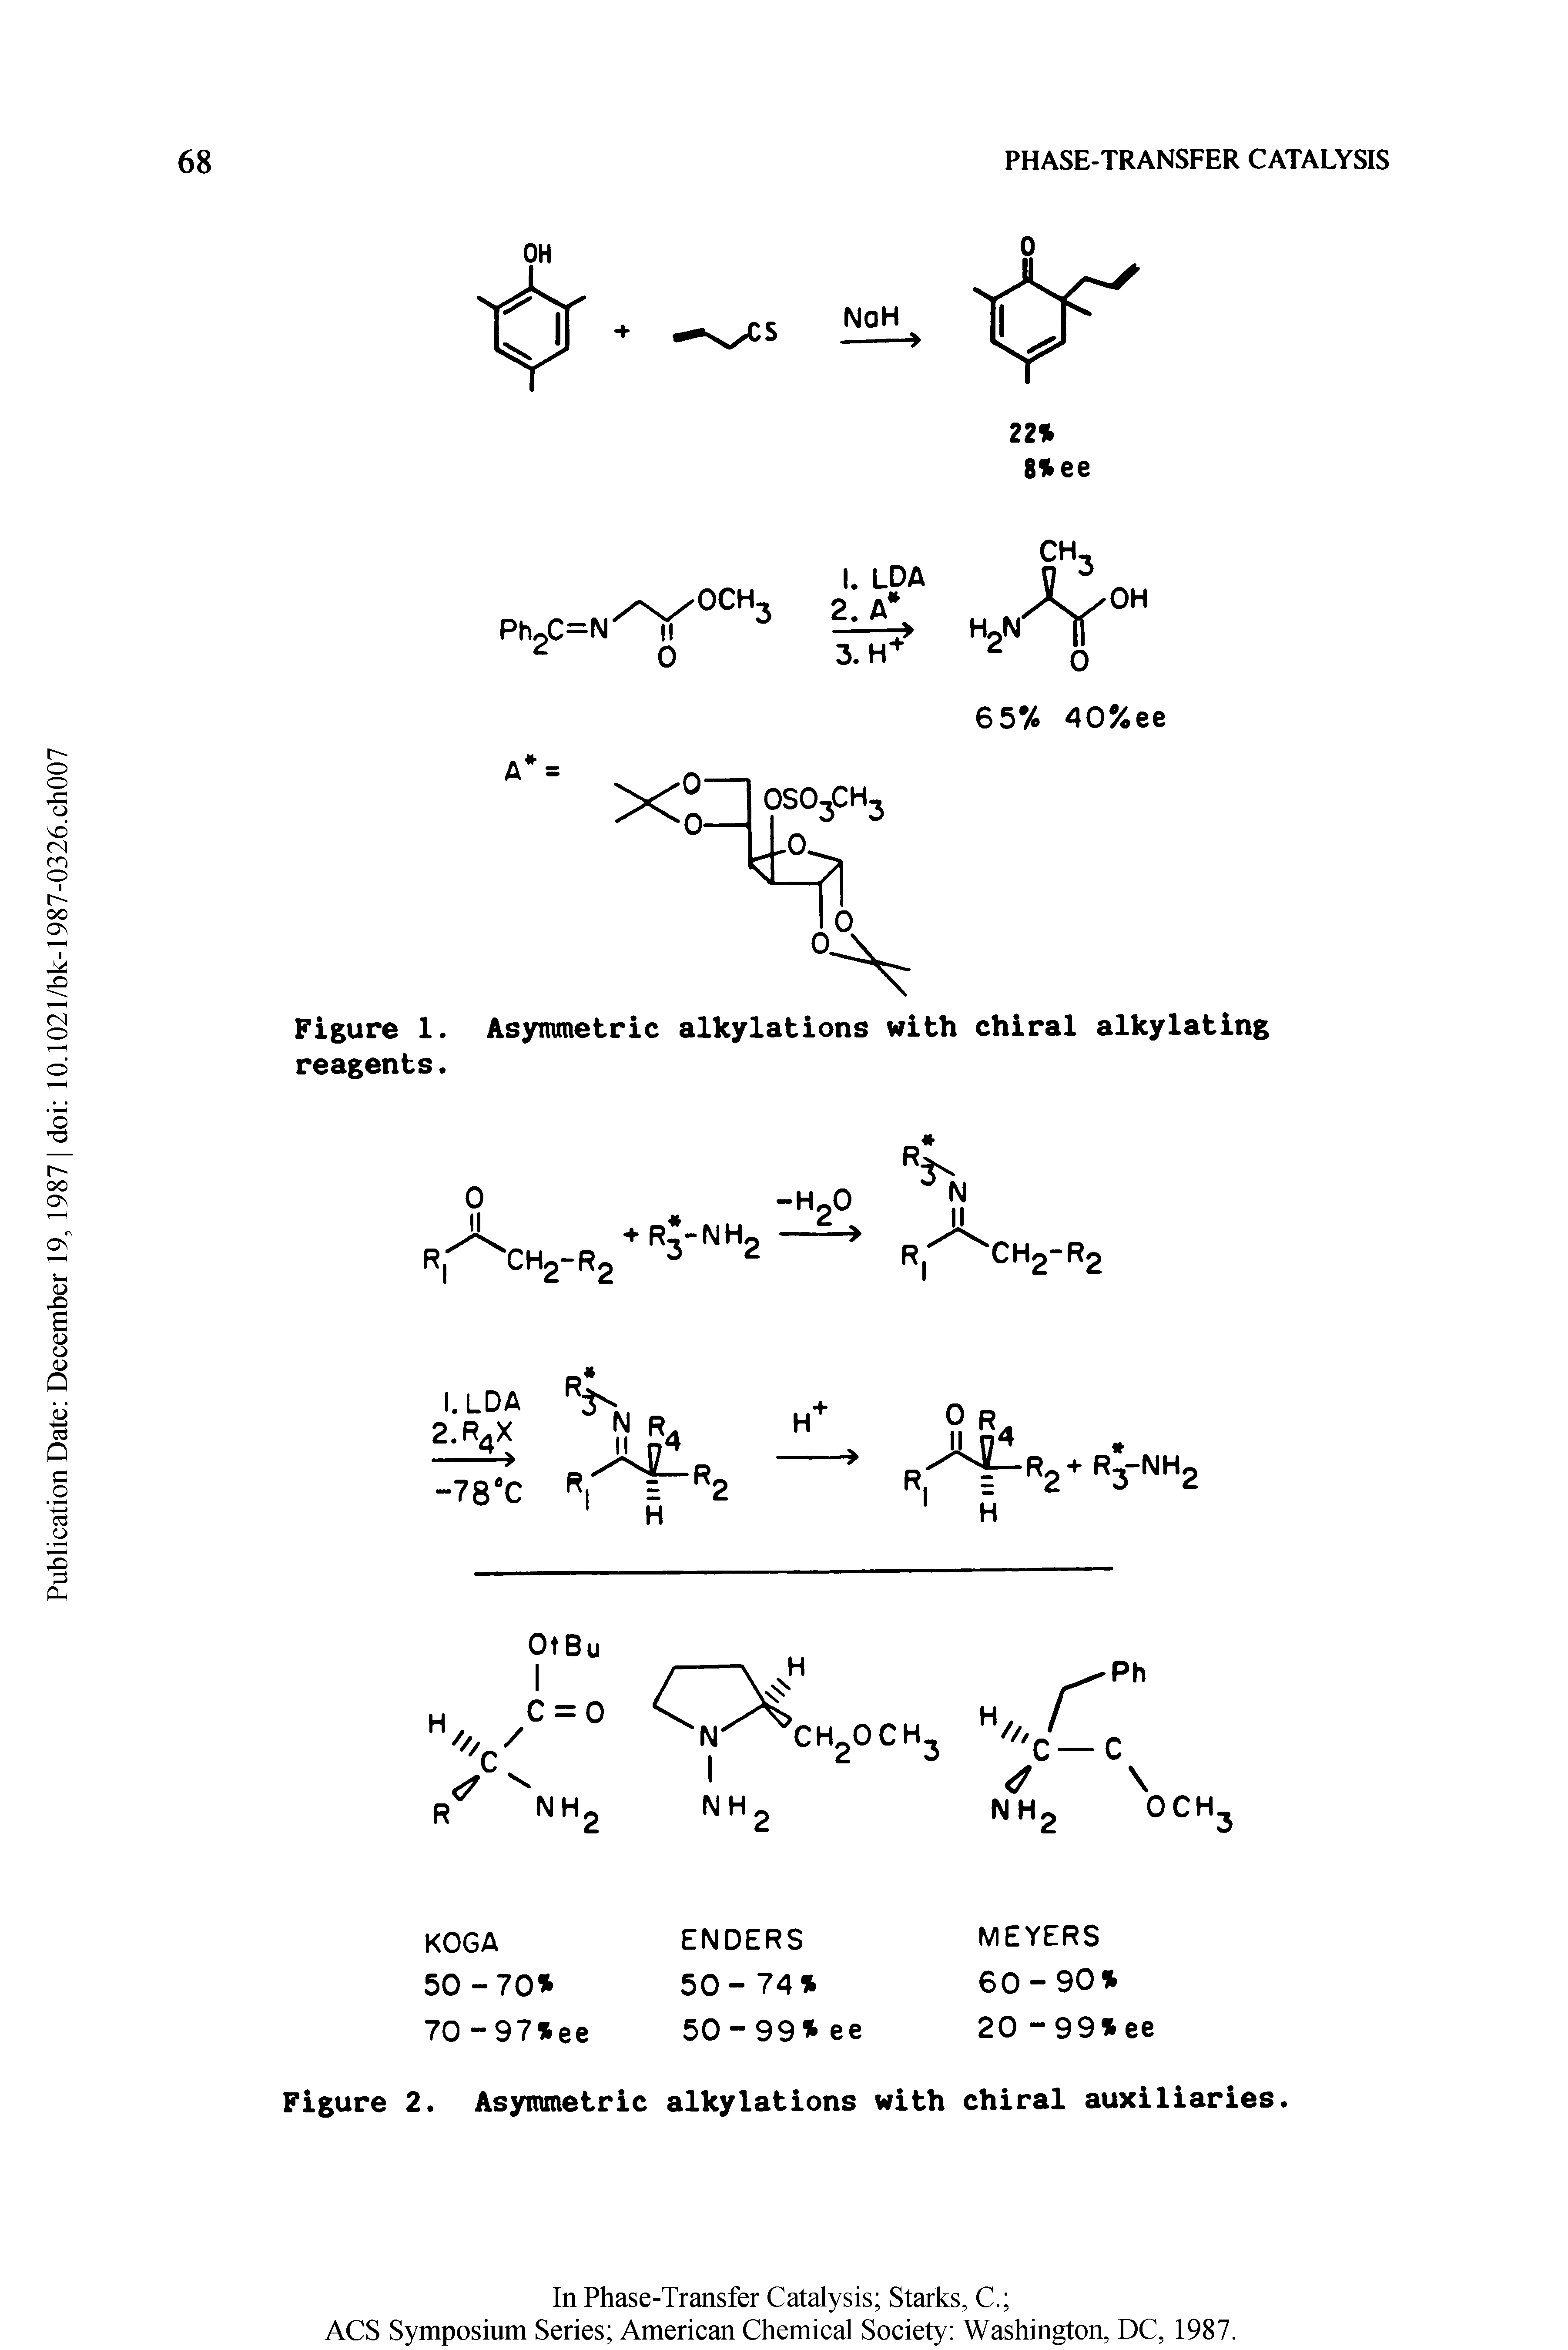 Figure 2. Asymmetric alkylations with chiral auxiliaries.